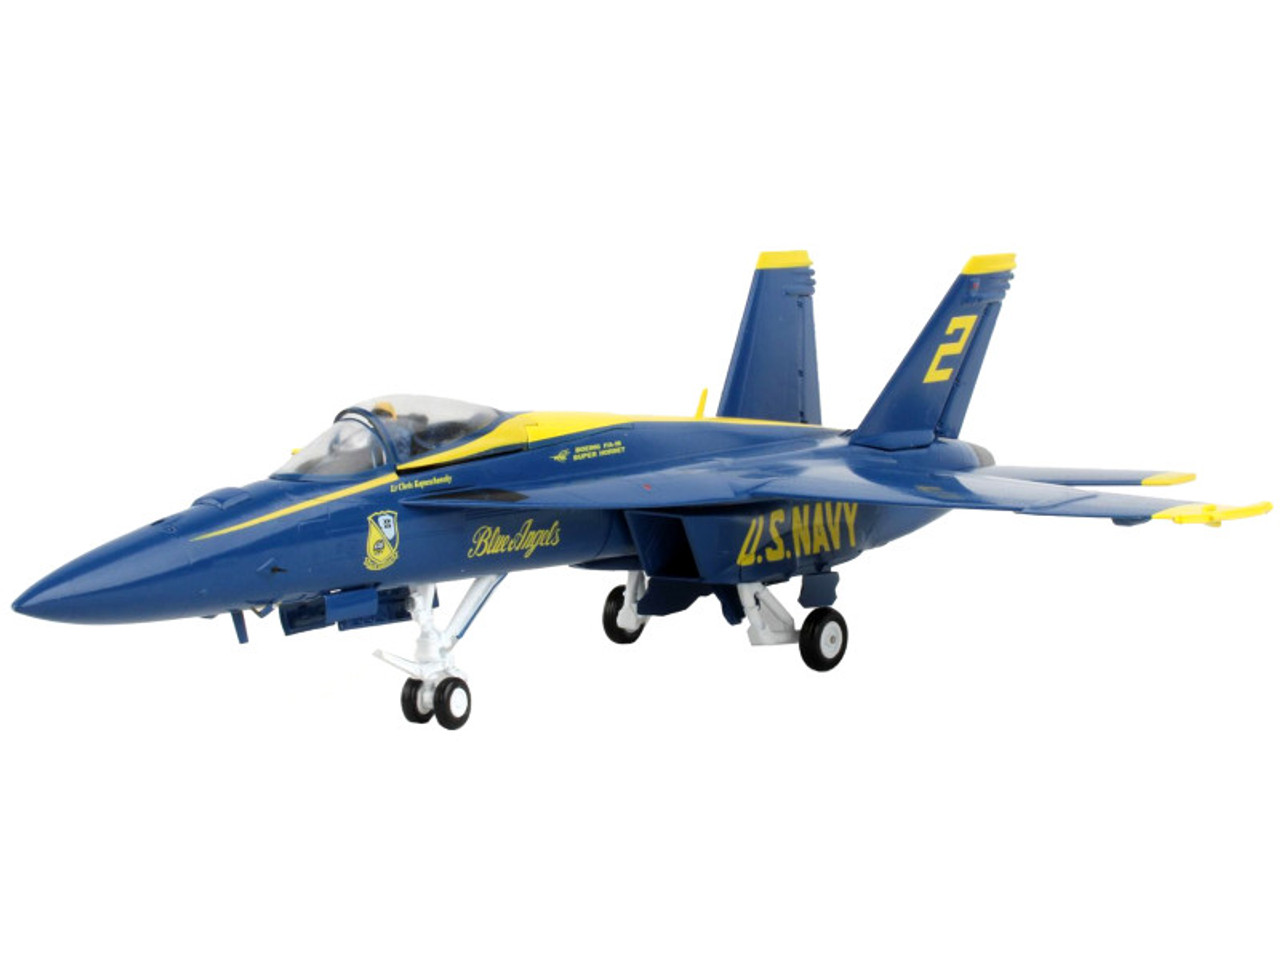 Boeing F/A-18E Super Hornet Fighter Aircraft "Blue Angels #2" United States Navy "Gemini Aces" Series 1/72 Diecast Model Airplane by GeminiJets